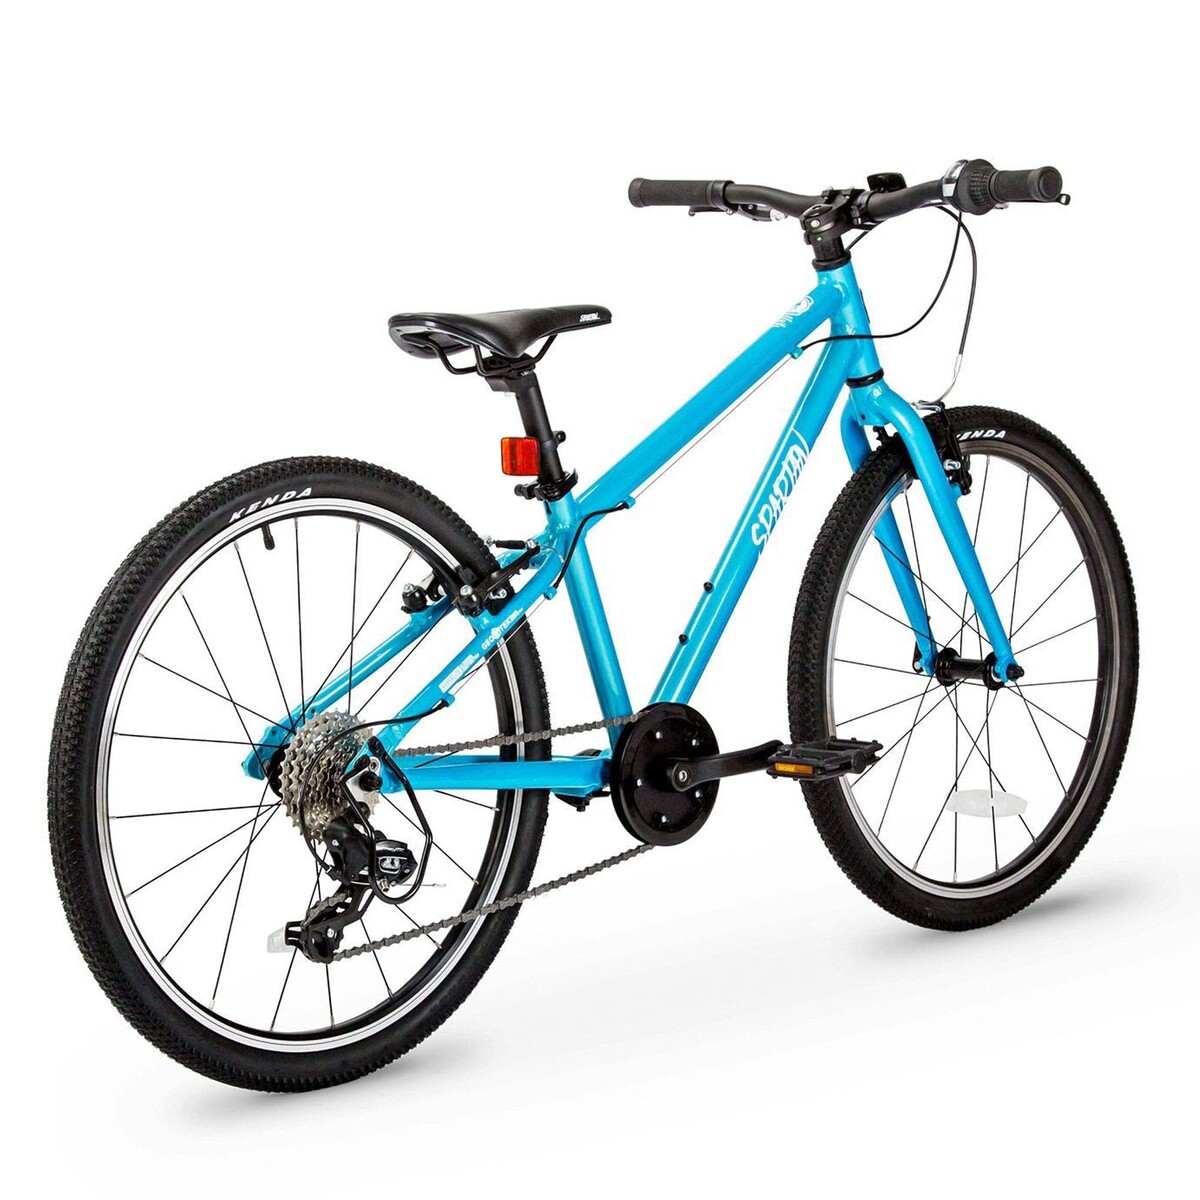 Spartan 20 inches Hyperlite Alloy Bicycle, Light Blue, SP-3140